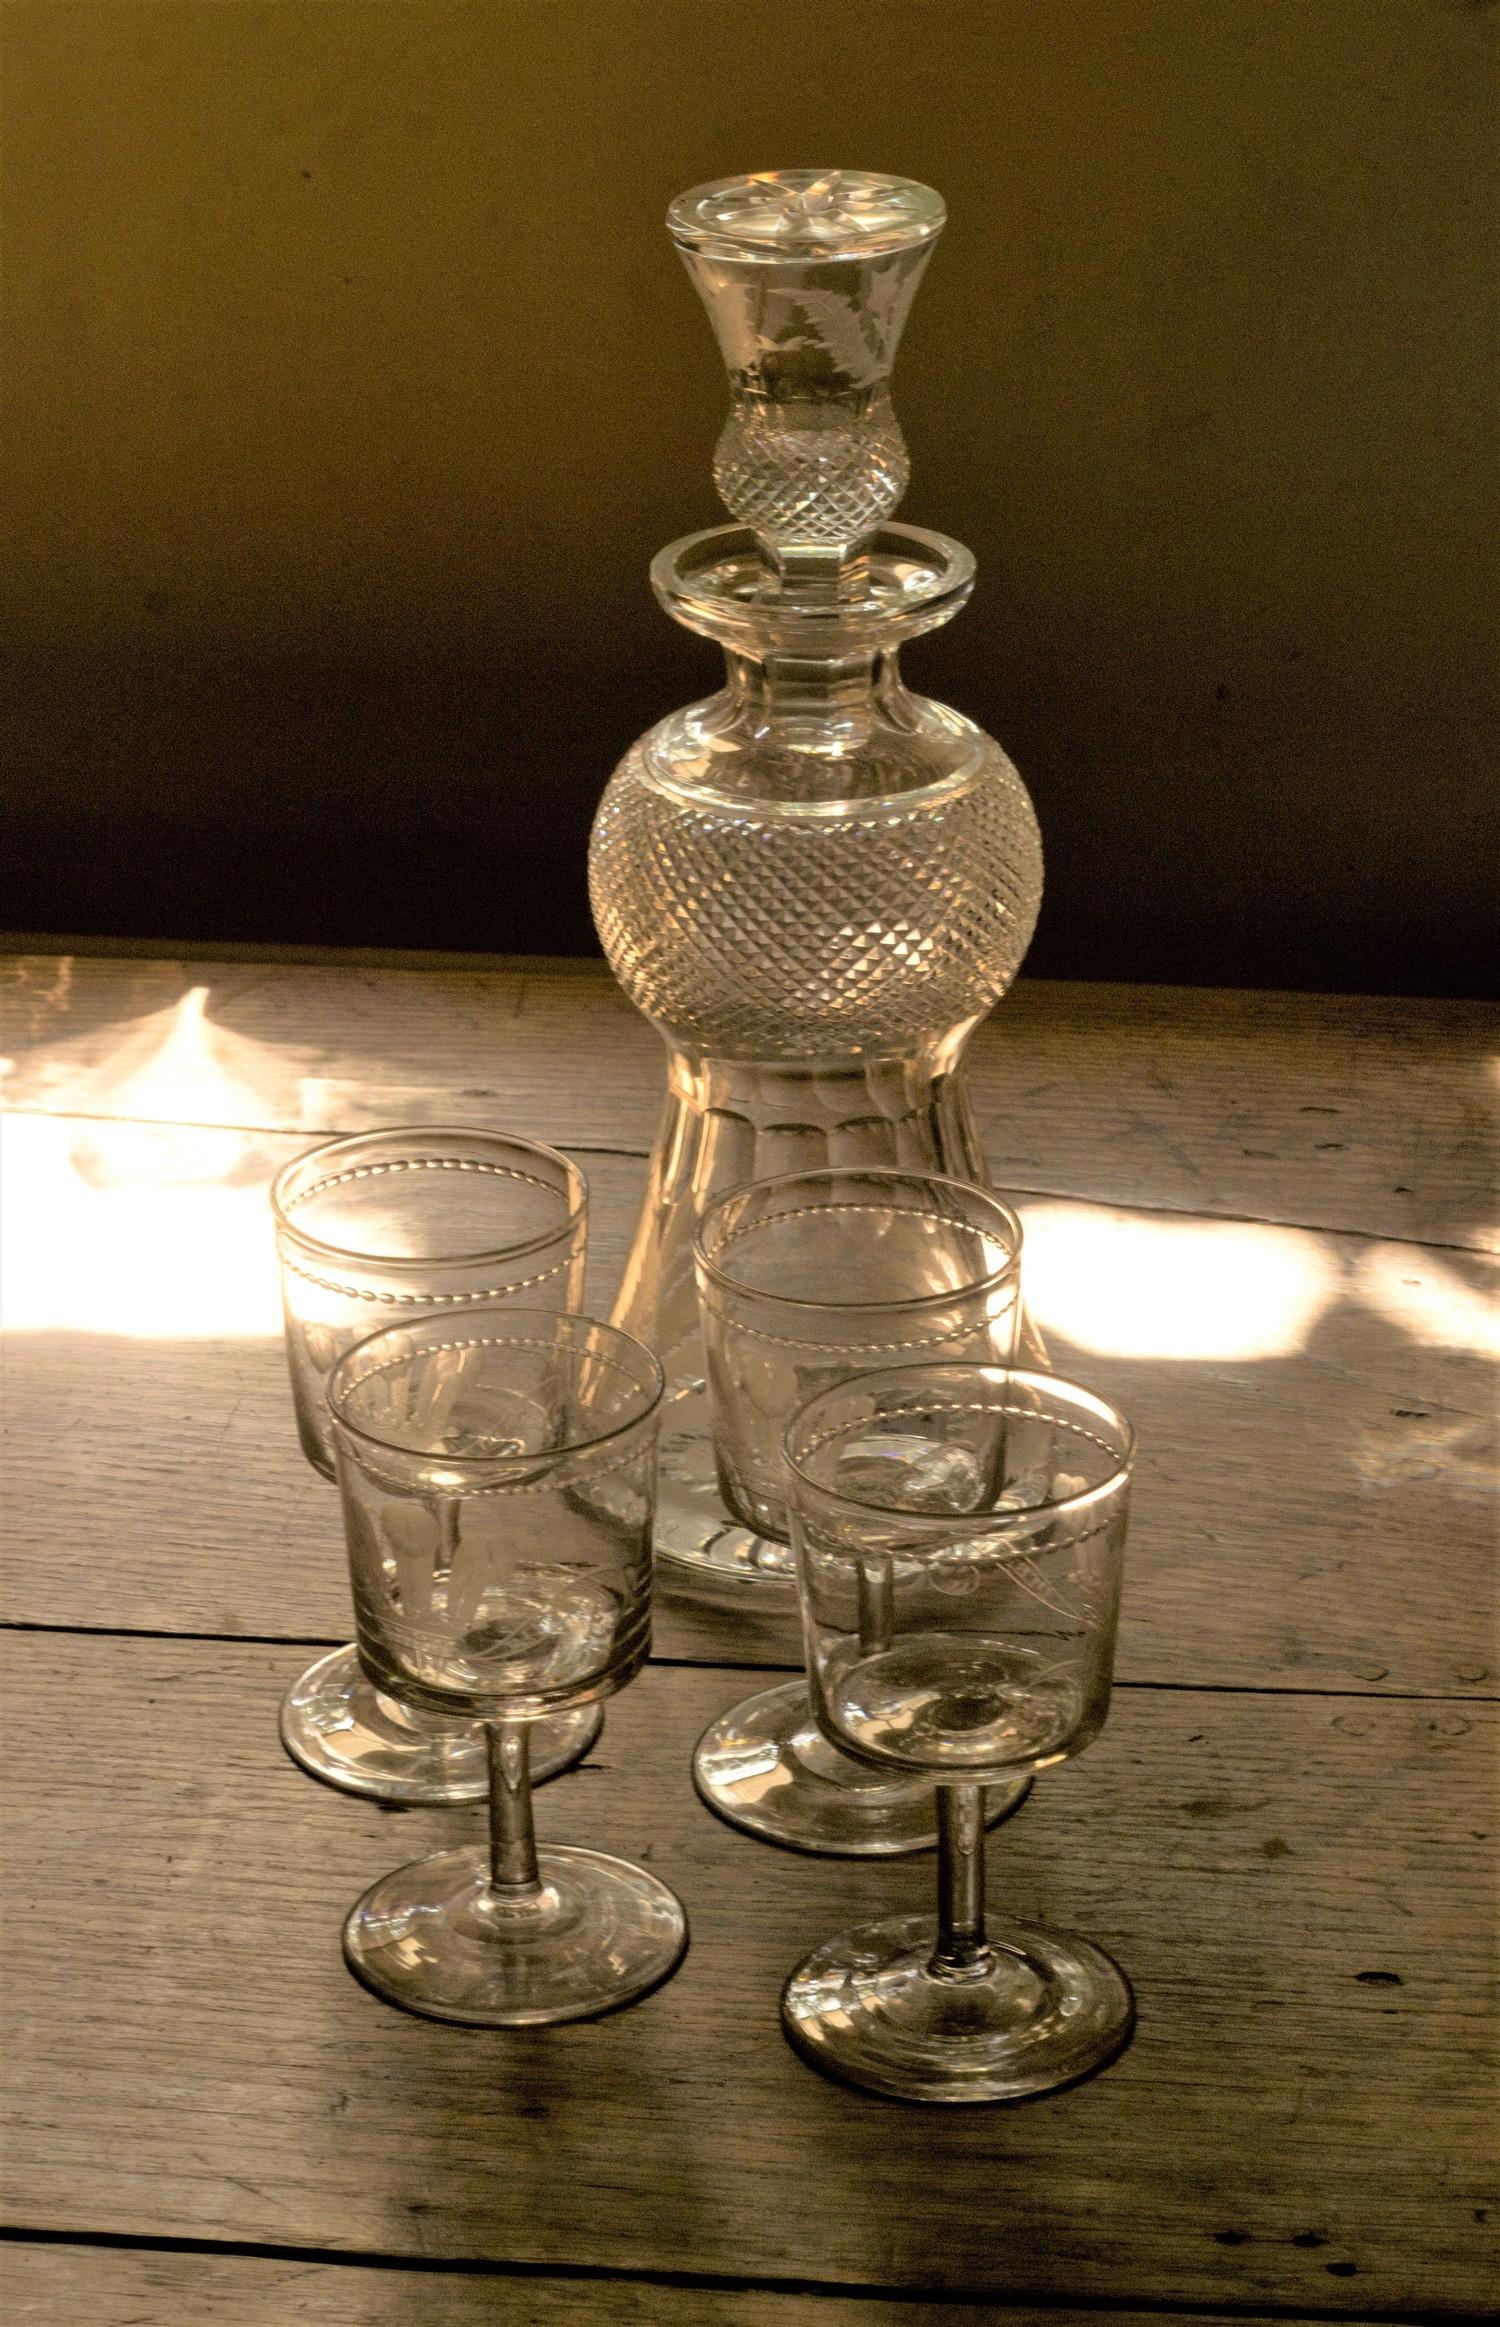 Scottish thistle form decanter engraved with thistles, height 30 cm, and four wine glasses